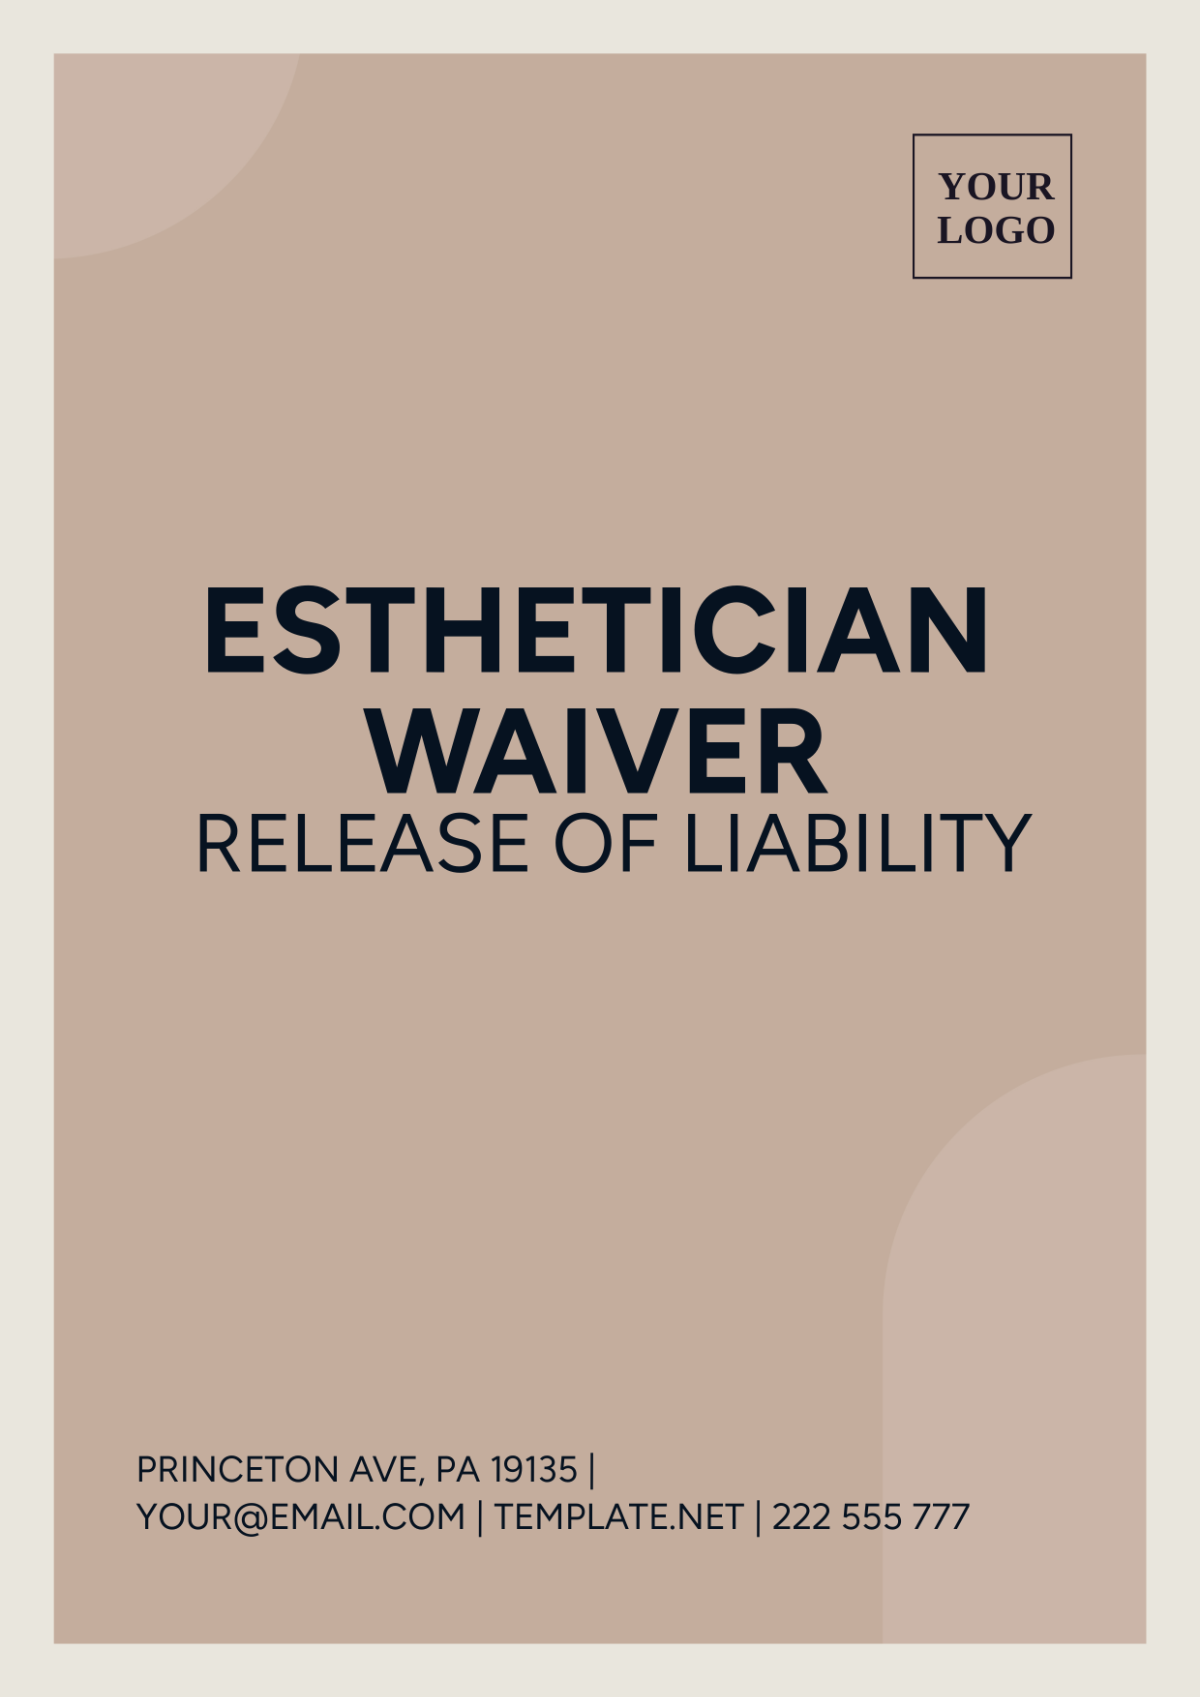 Esthetician Waiver Release Of Liability Template